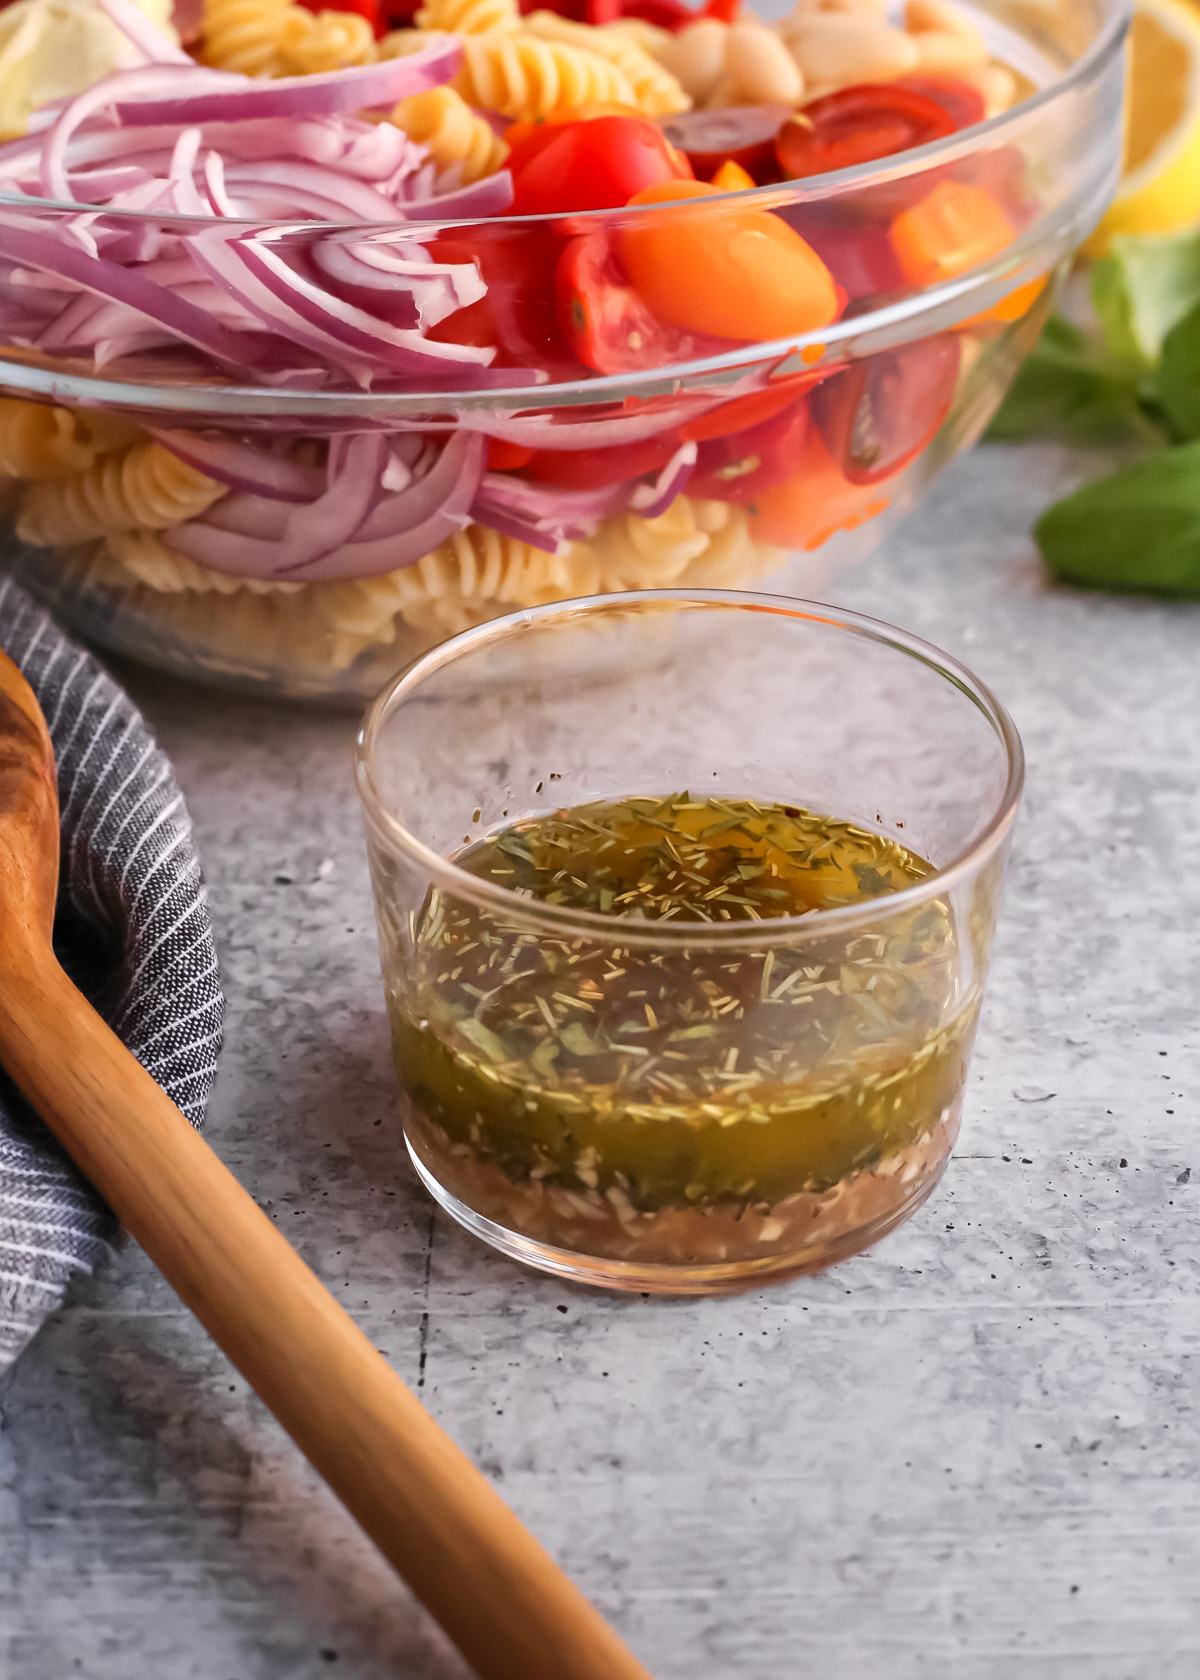 A small clear glass ramekin containing a homemade Italian-style vinaigrette on a kitchen countertop with a pasta salad and fresh basil in the background